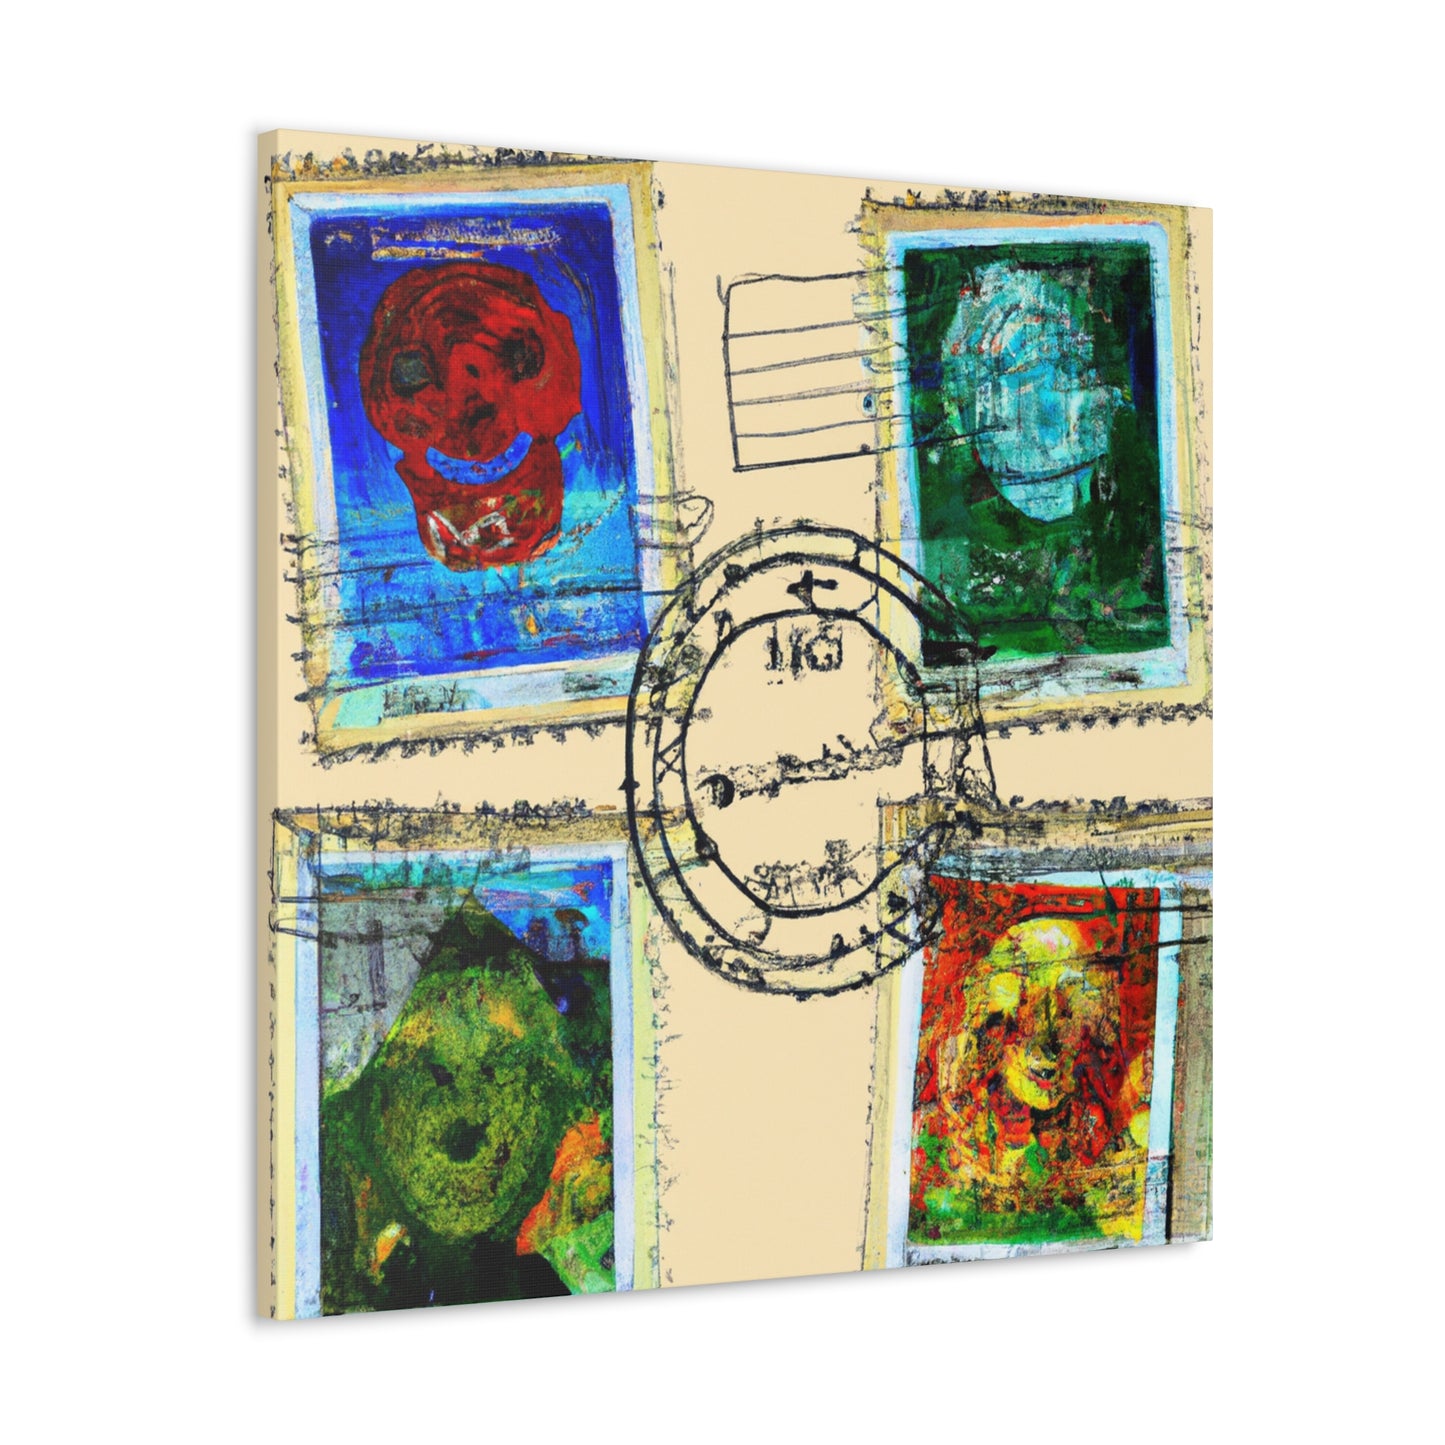 "International Wonders" - Postage Stamp Collector Canvas Wall Art